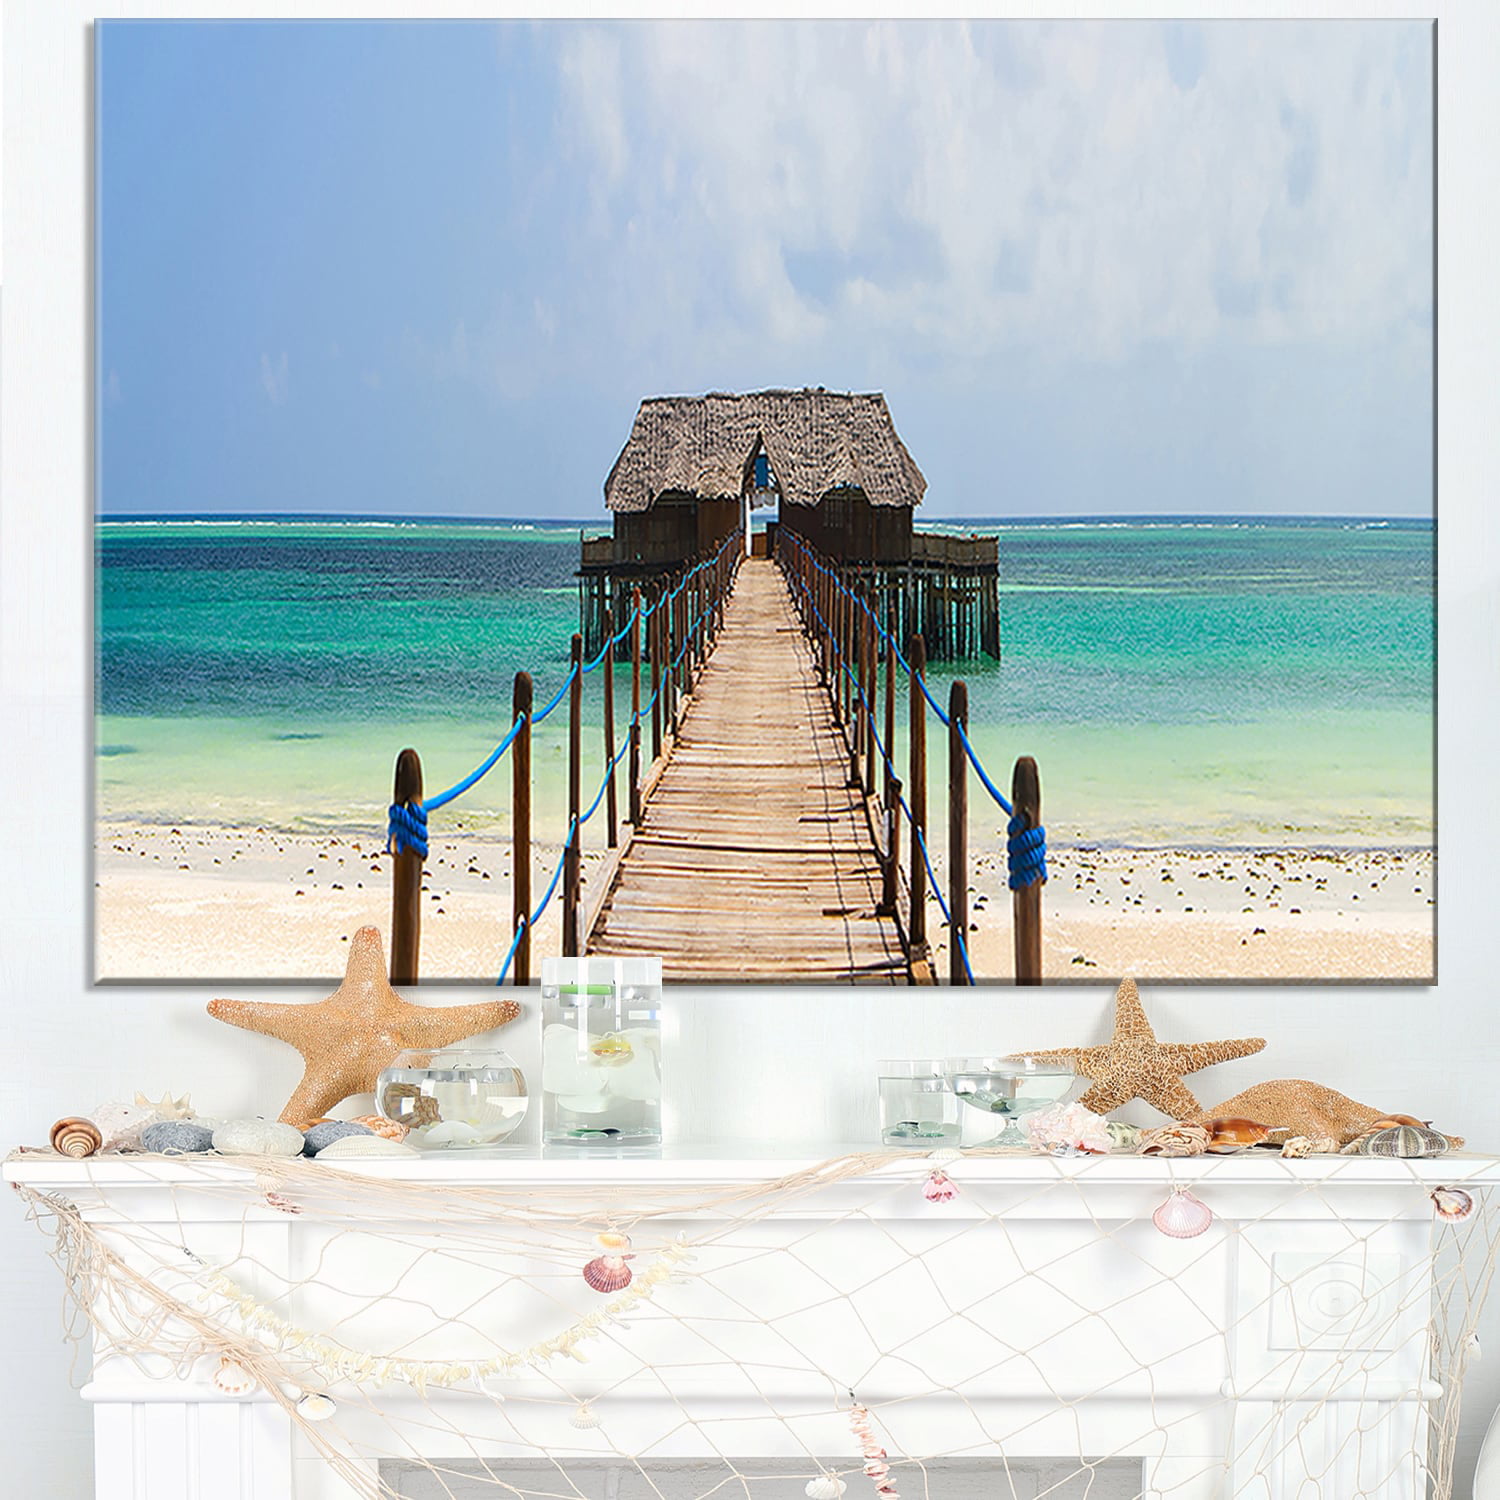 39 in Designart TAP11499-39-32 Exotic Wood Jetty at Zanzibar Island Wooden Sea Bridge Blanket Décor Art for Home and Office Wall Tapestry x 32 in Medium